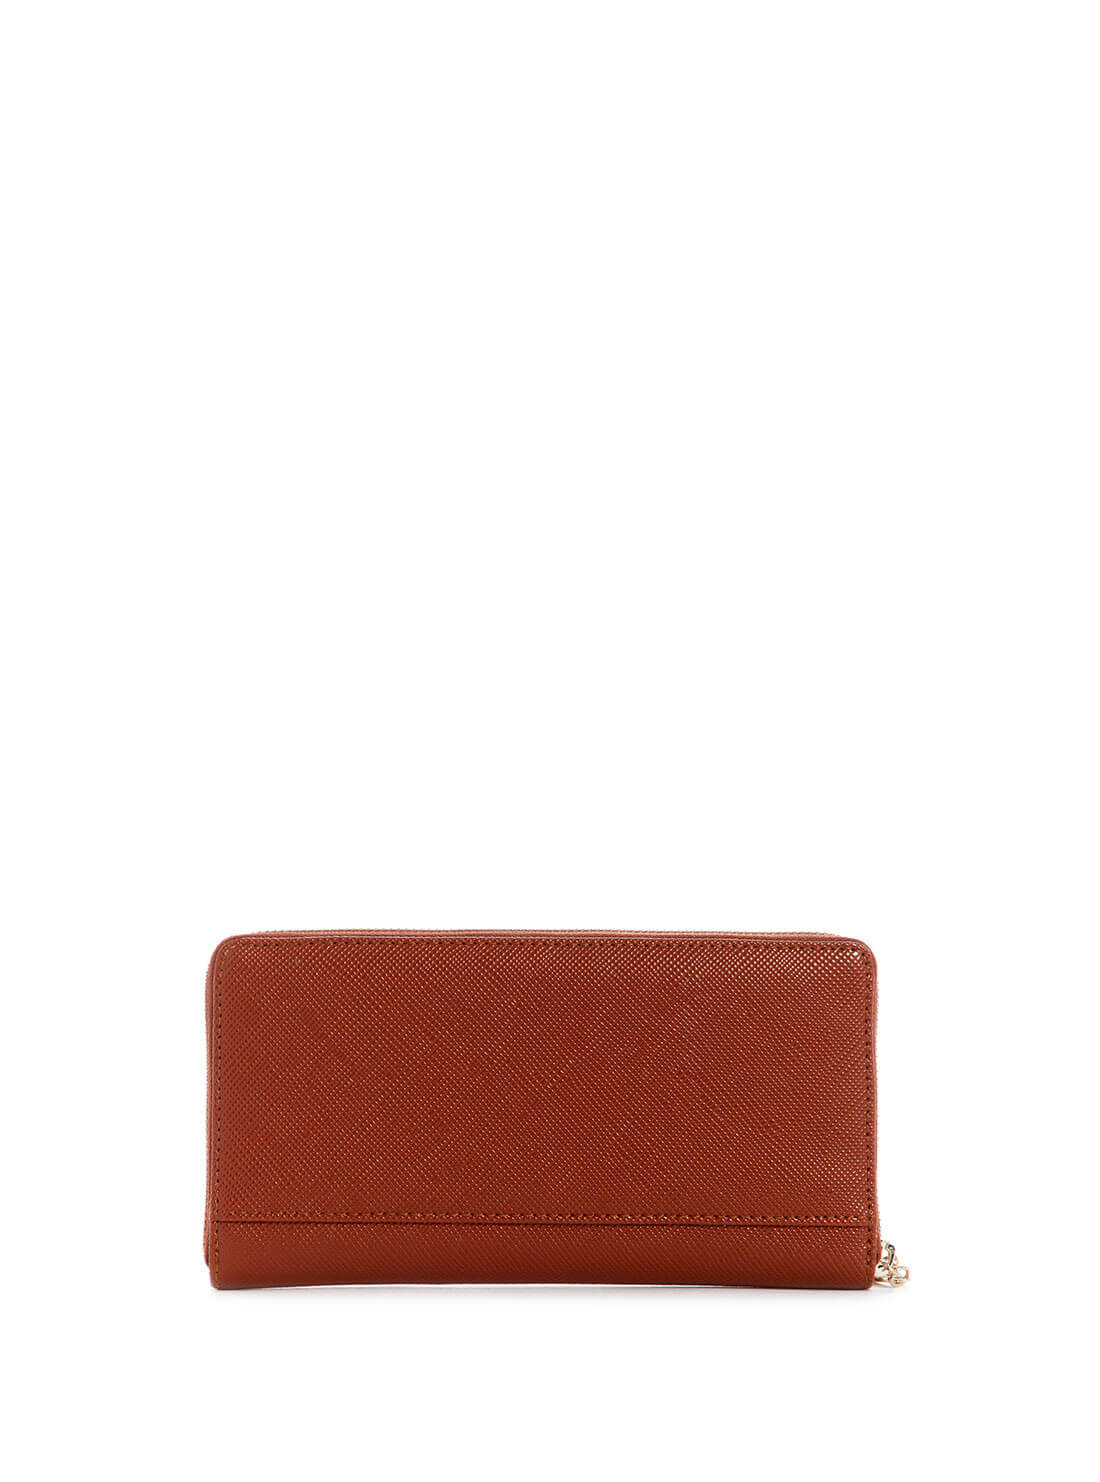 Brown Noelle Cheque Organiser Wallet - GUESS